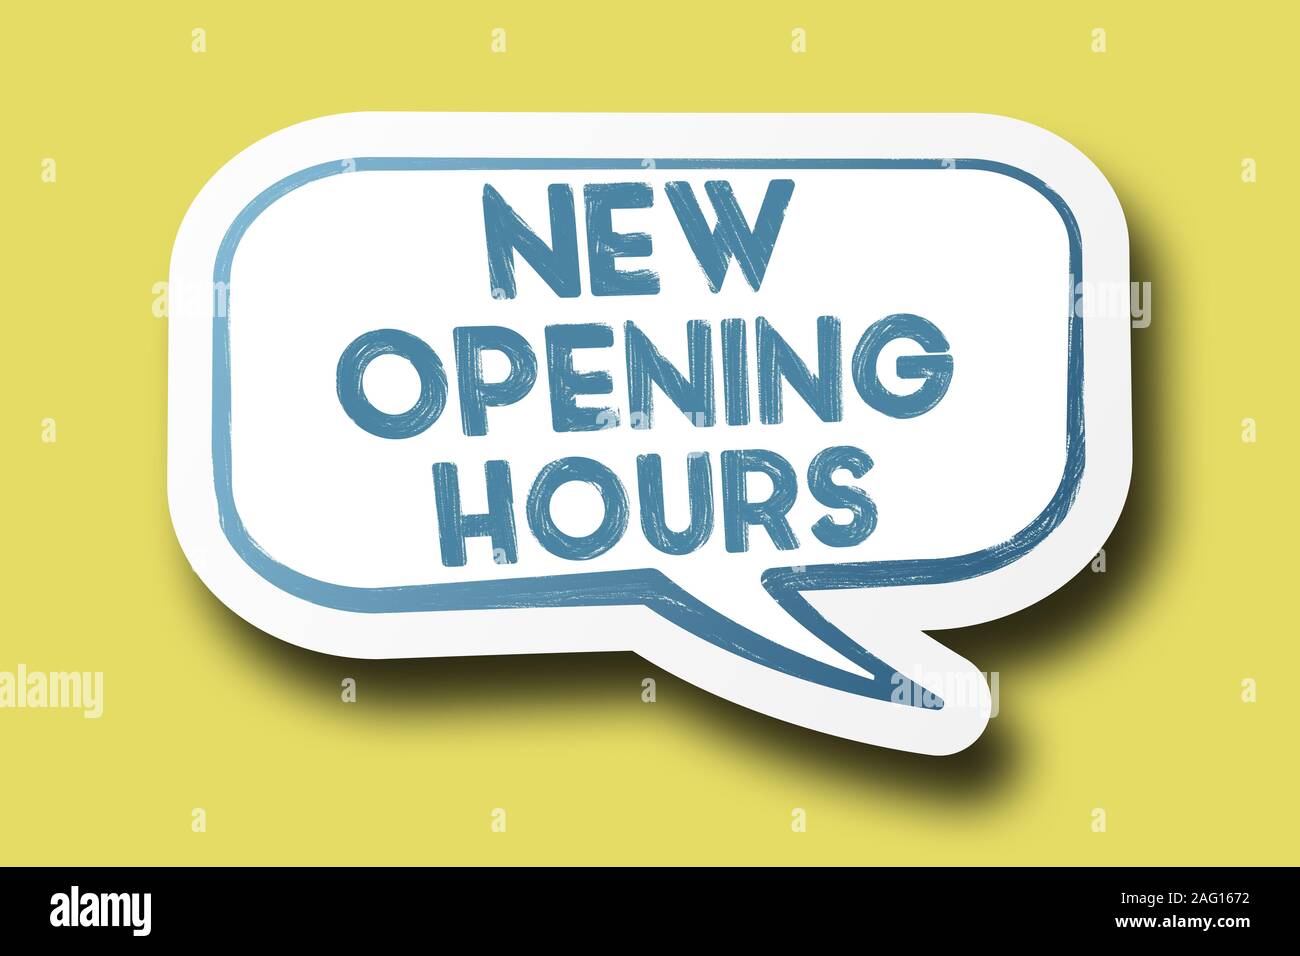 text NEW OPENING HOURS on speech bubble against bright yellow background Stock Photo